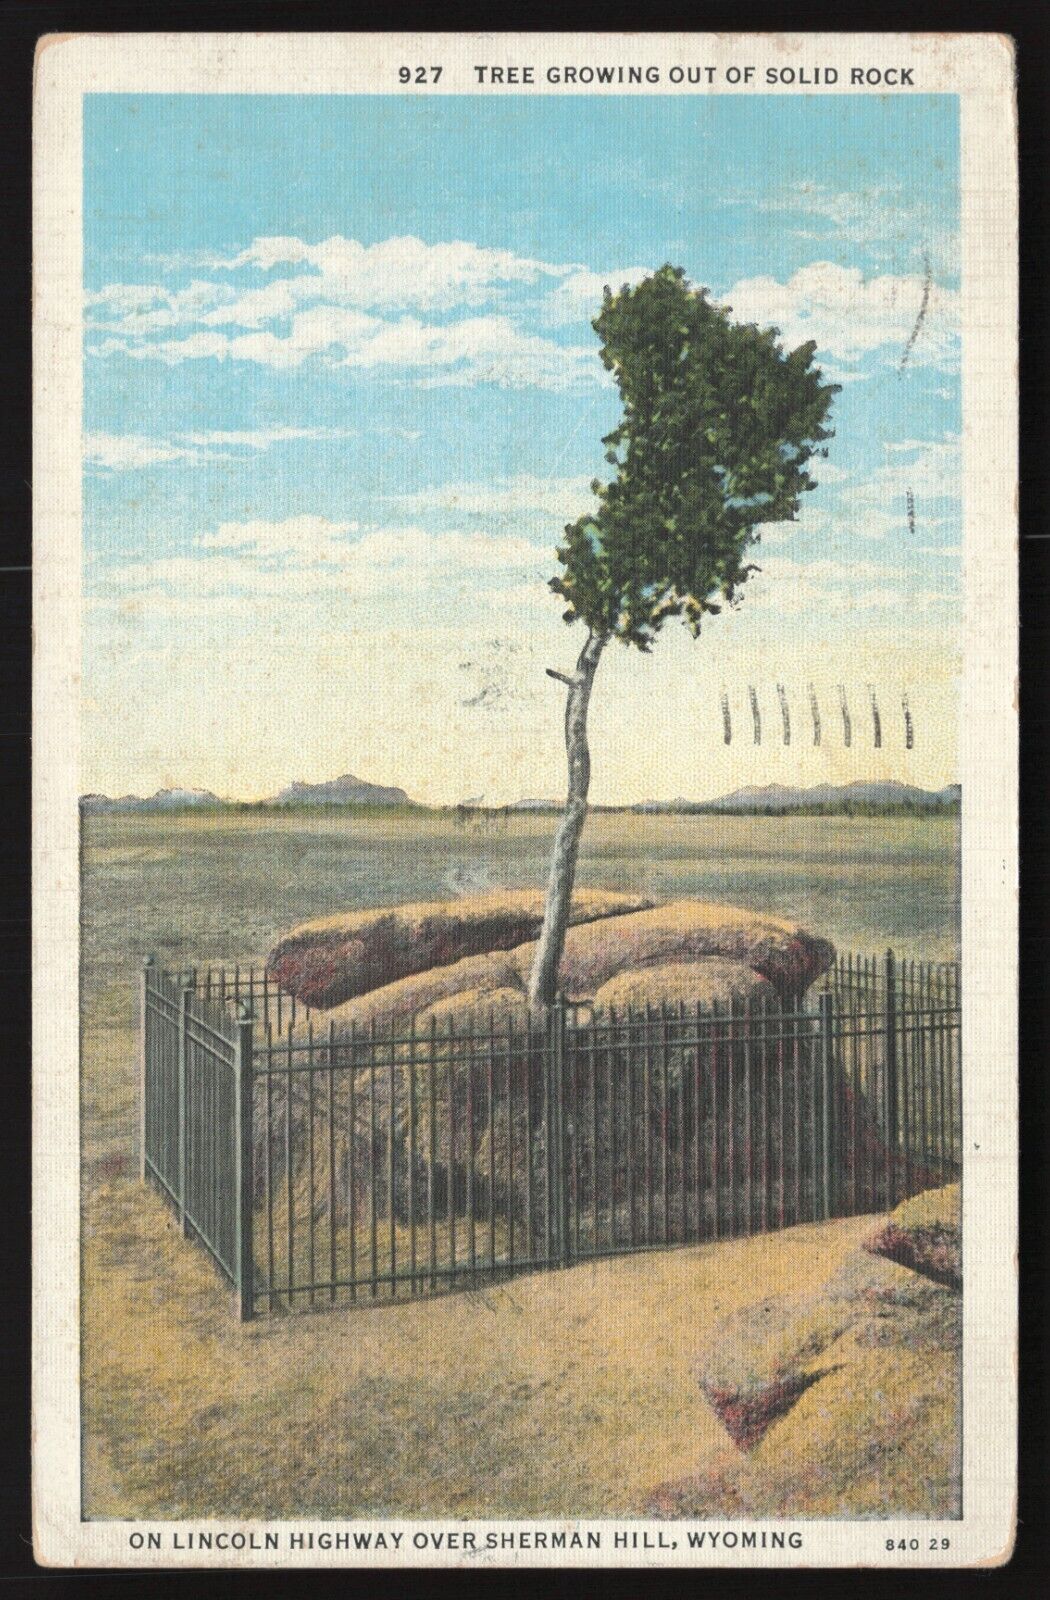 Vintage Postcard - Lone Tree Growing Out of Solid Rock